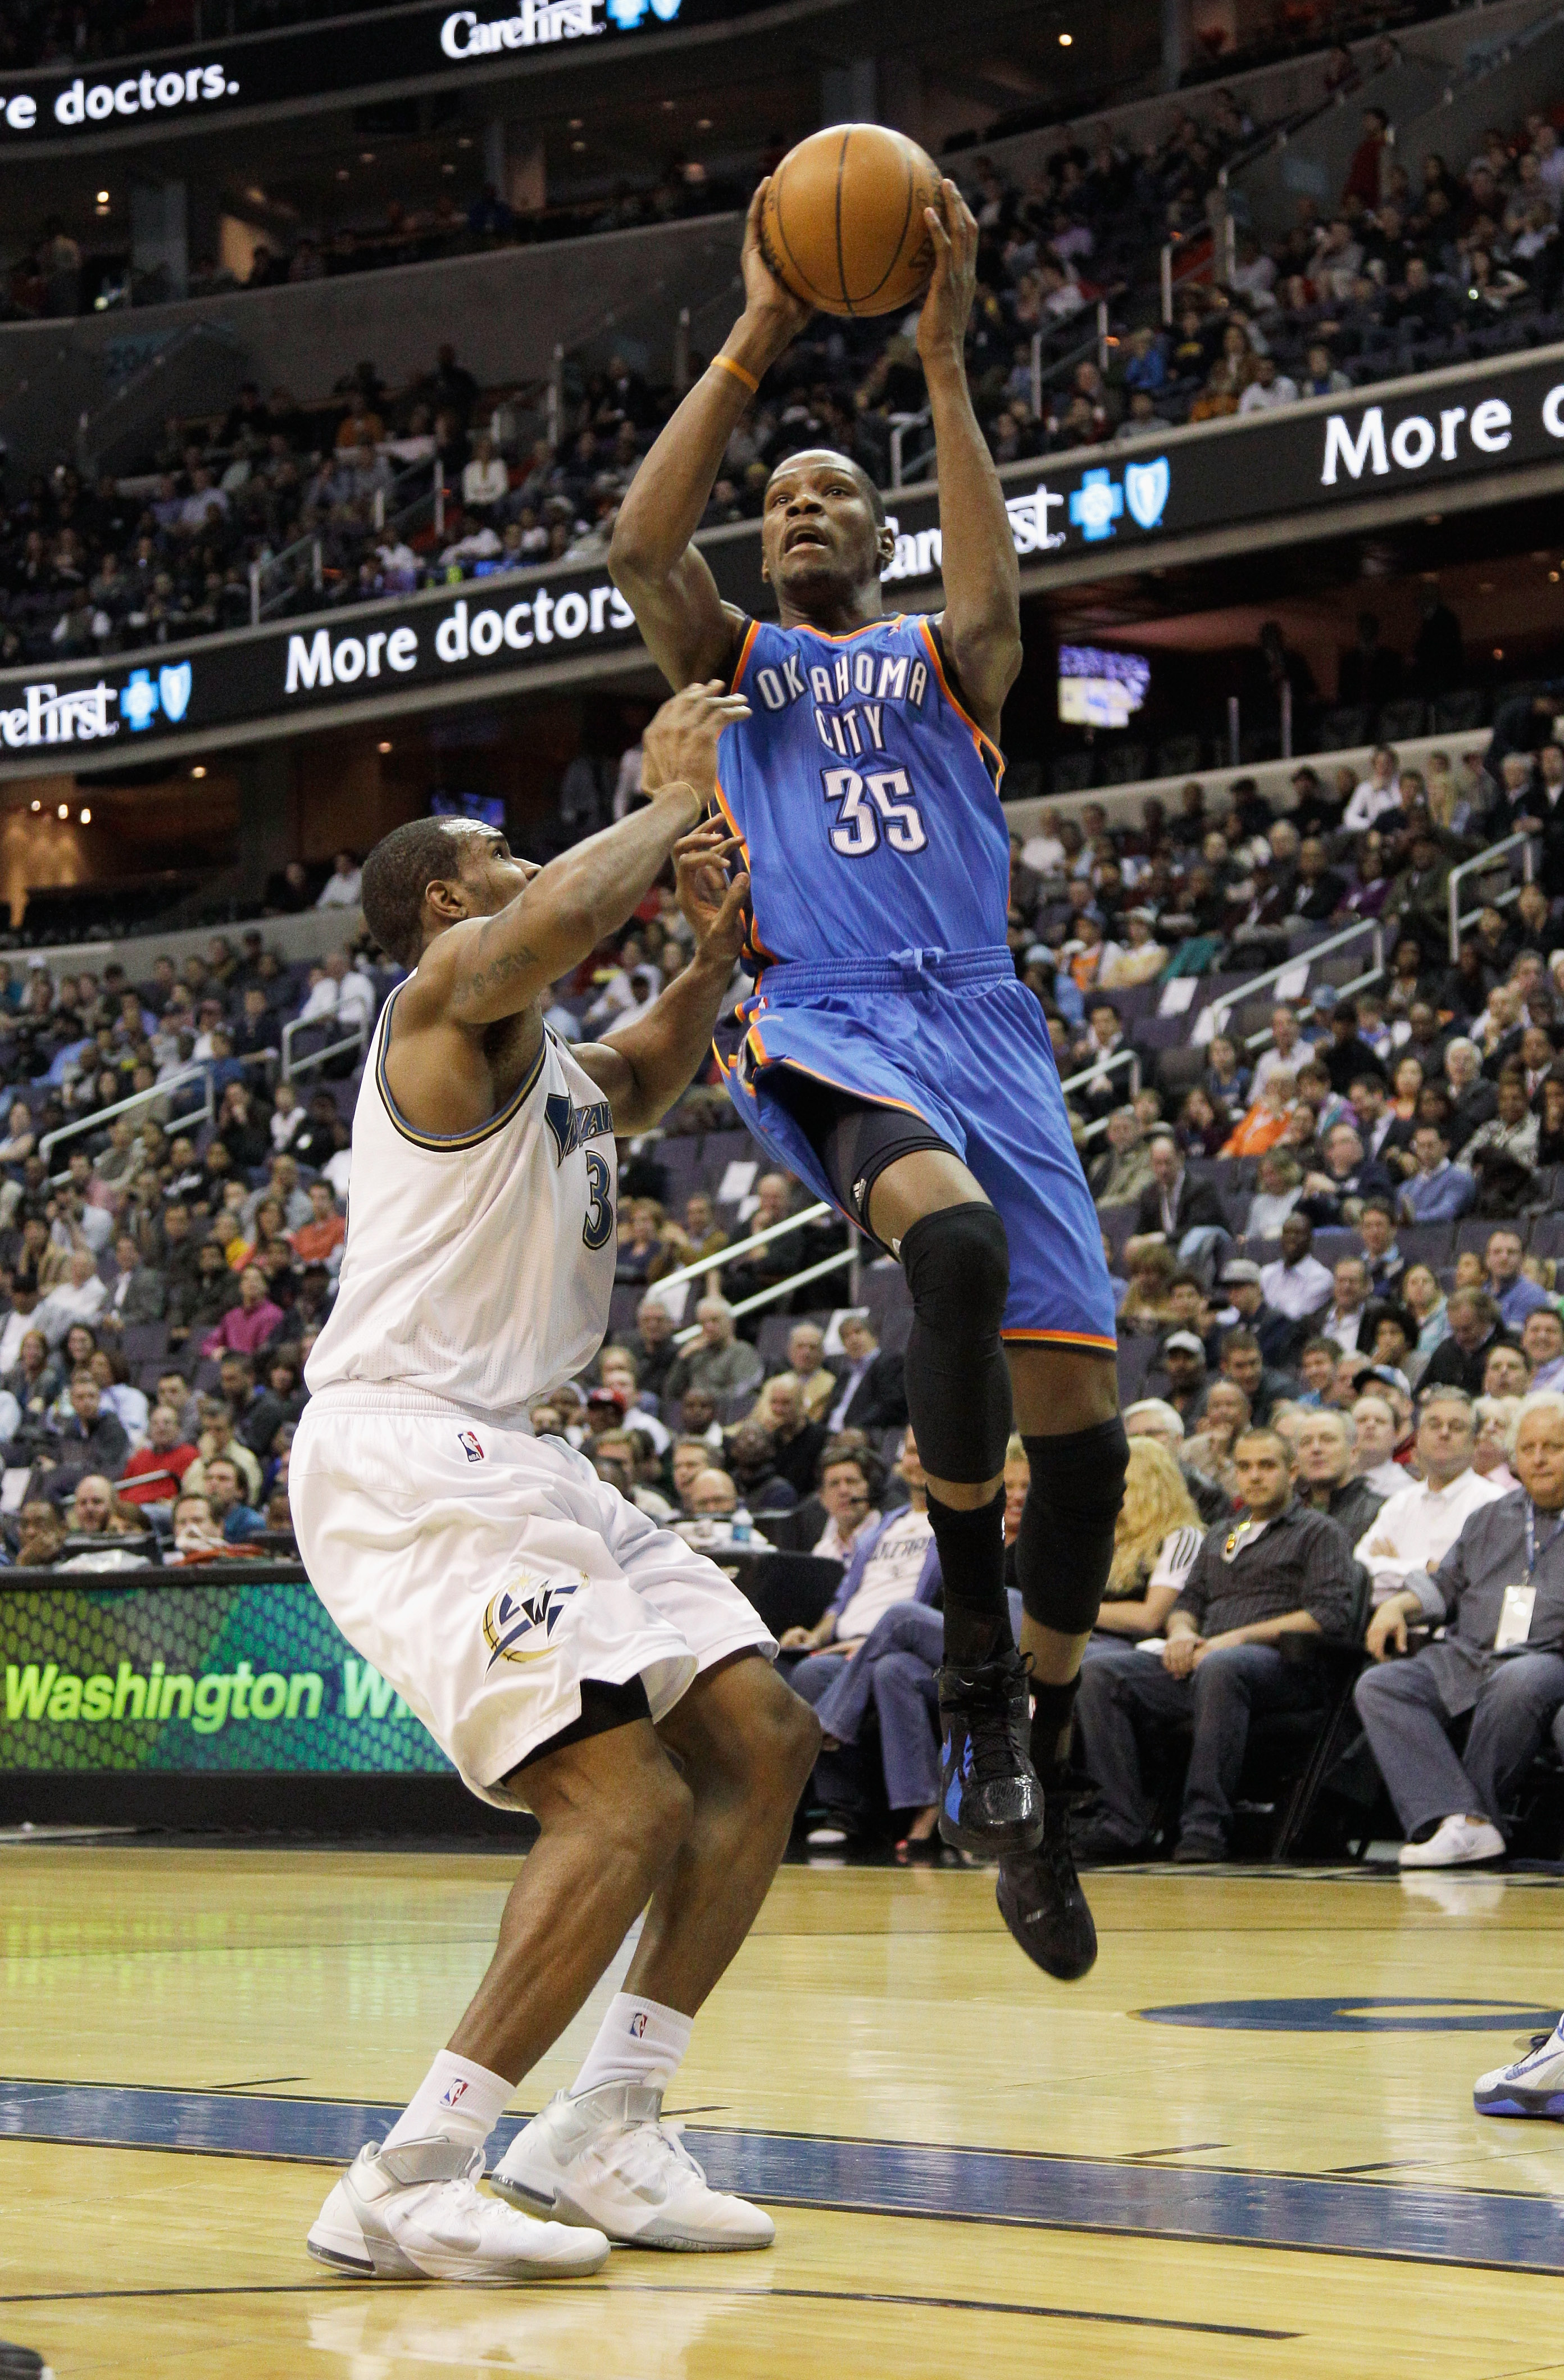 WASHINGTON, DC - MARCH 14: Kevin Durant #35 of the Oklahoma City Thunder puts up a shot in front of Trevor Booker #35 of the Washington Wizards during the first half at the Verizon Center on March 14, 2011 in Washington, DC. NOTE TO USER: User expressly a